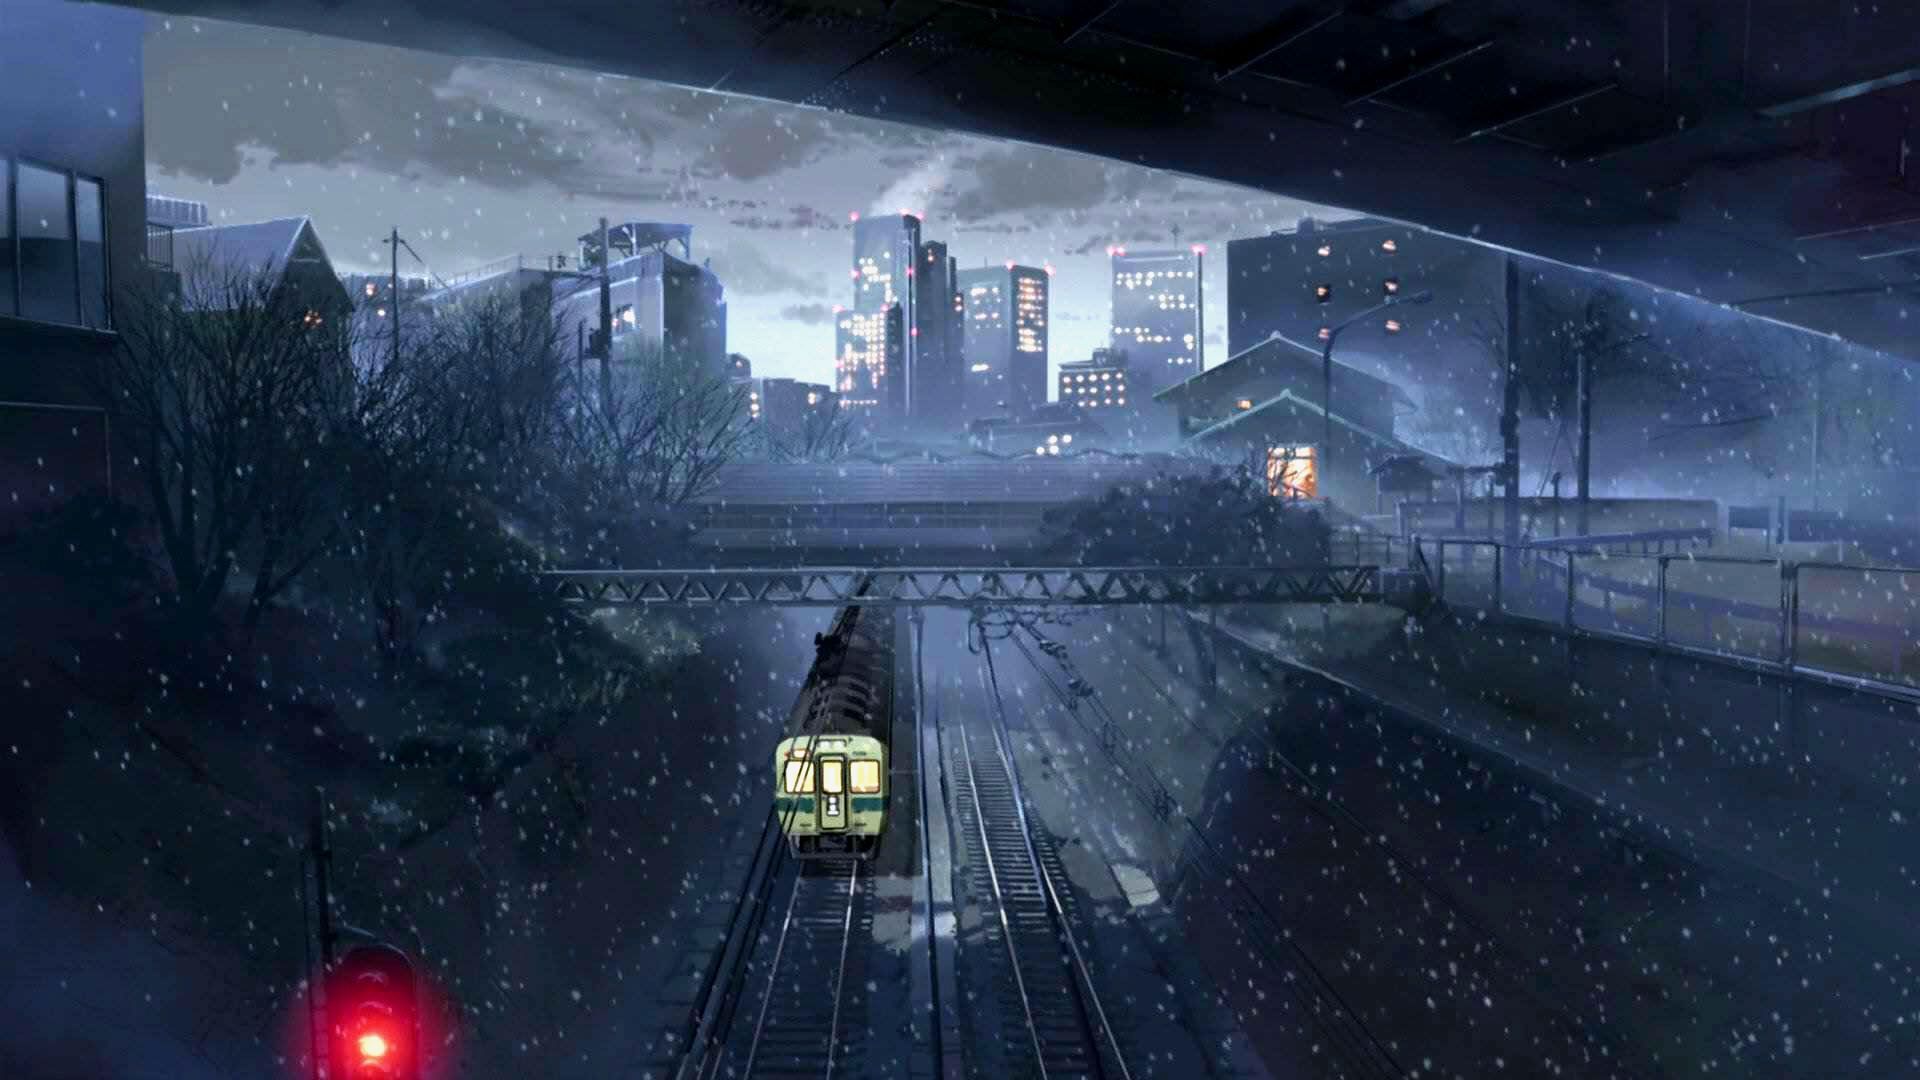 View, download, comment, and rate this 1920x1080 5 Centimeters Per